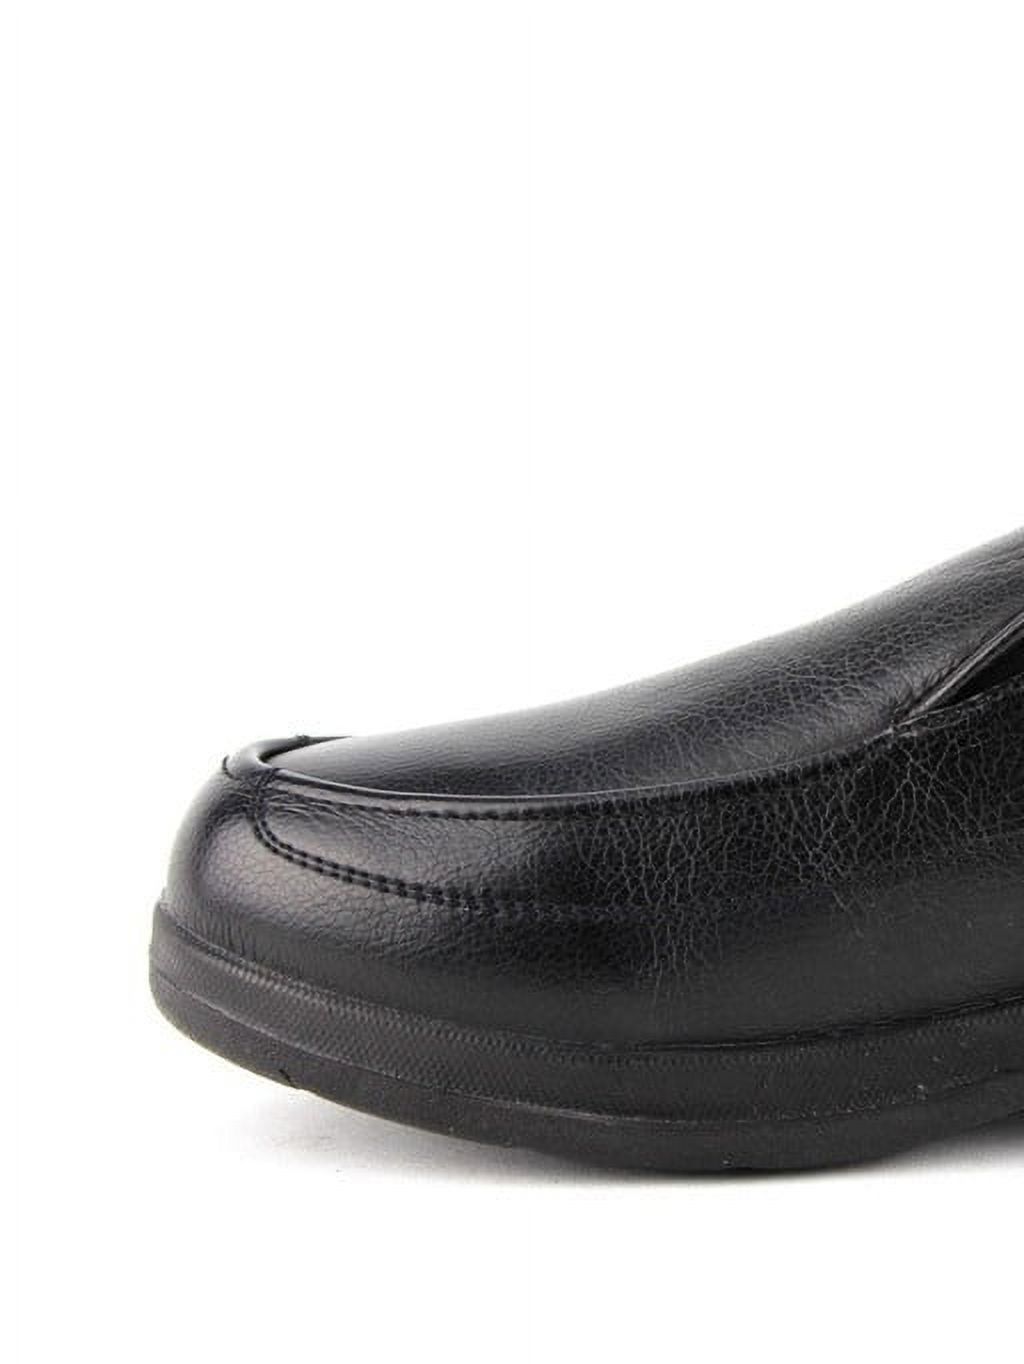 Han's Men's WZ14027 Slip Resistant Padded Insole Work Loafers Shoes - image 3 of 6